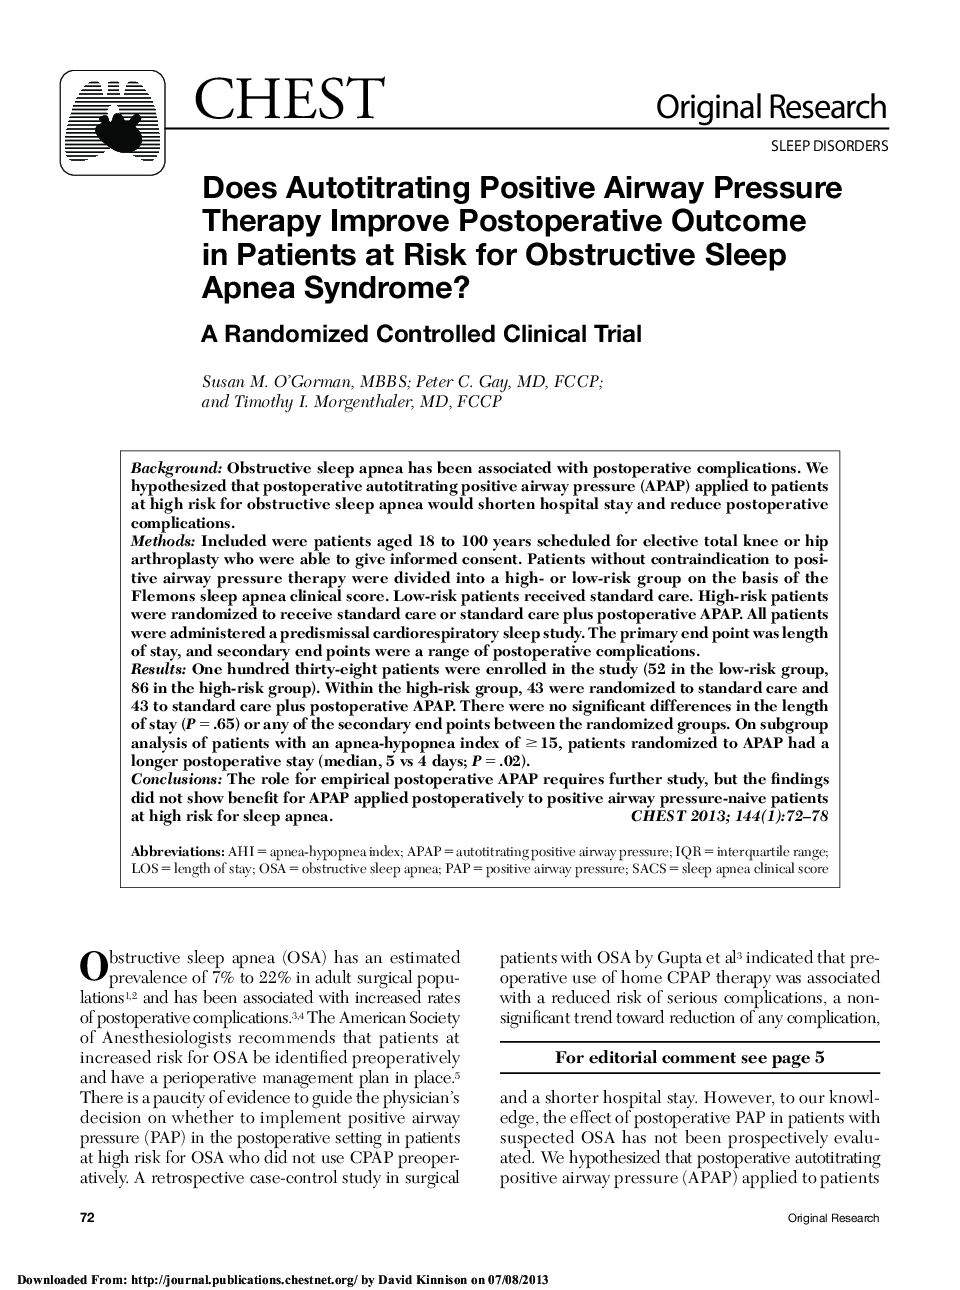 Does Autotitrating Positive Airway Pressure Therapy Improve Postoperative Outcome in Patients at Risk for Obstructive Sleep Apnea Syndrome?